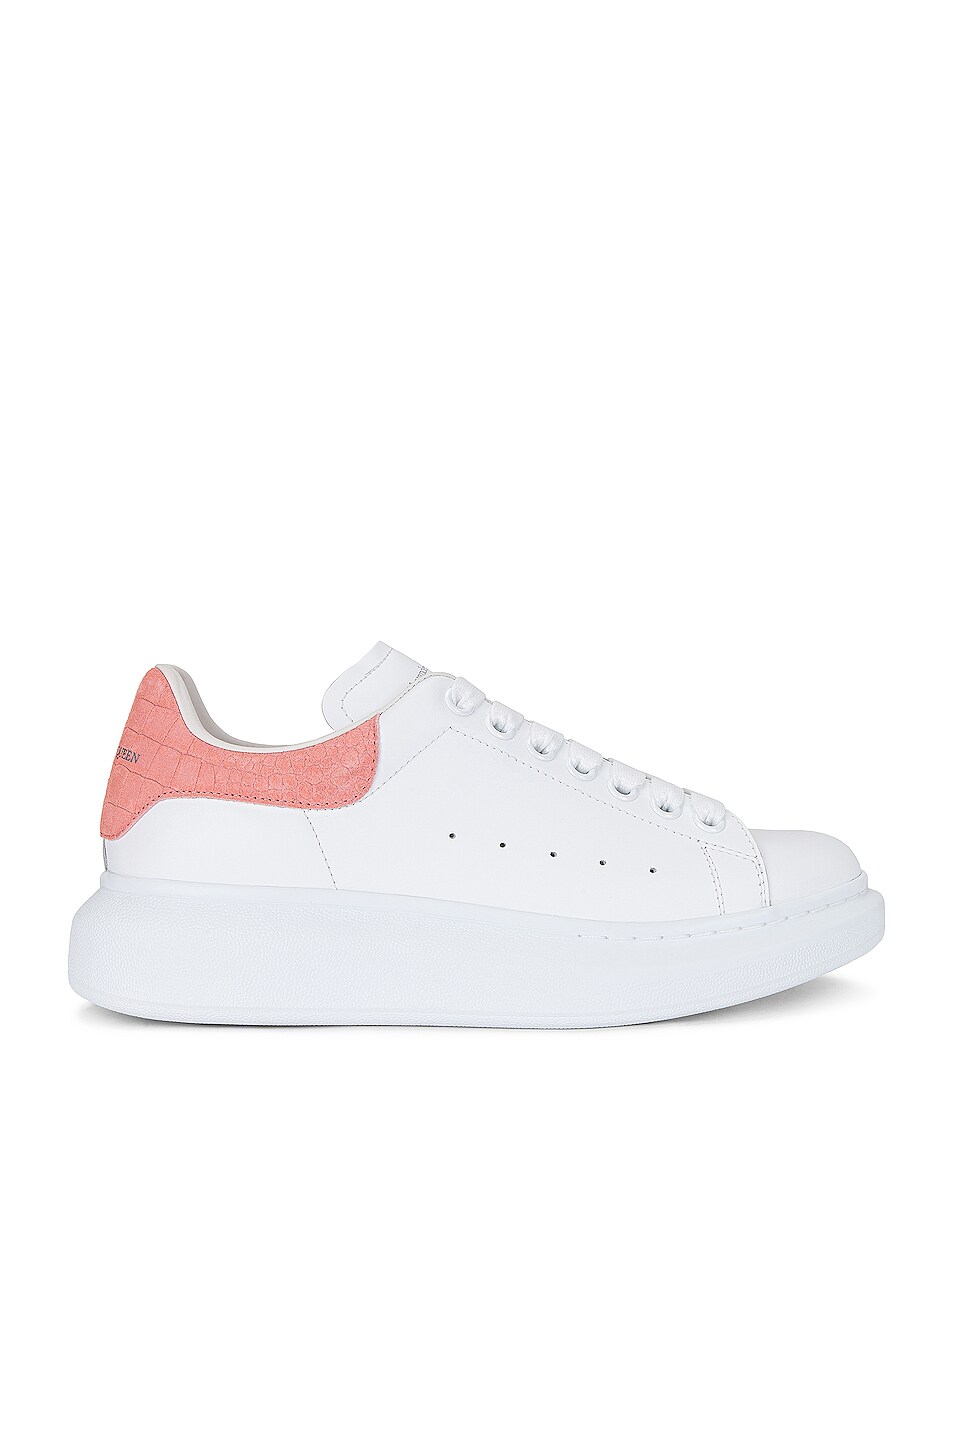 Image 1 of Alexander McQueen Leather & Rubber Sneakers in White & Rose Quartz